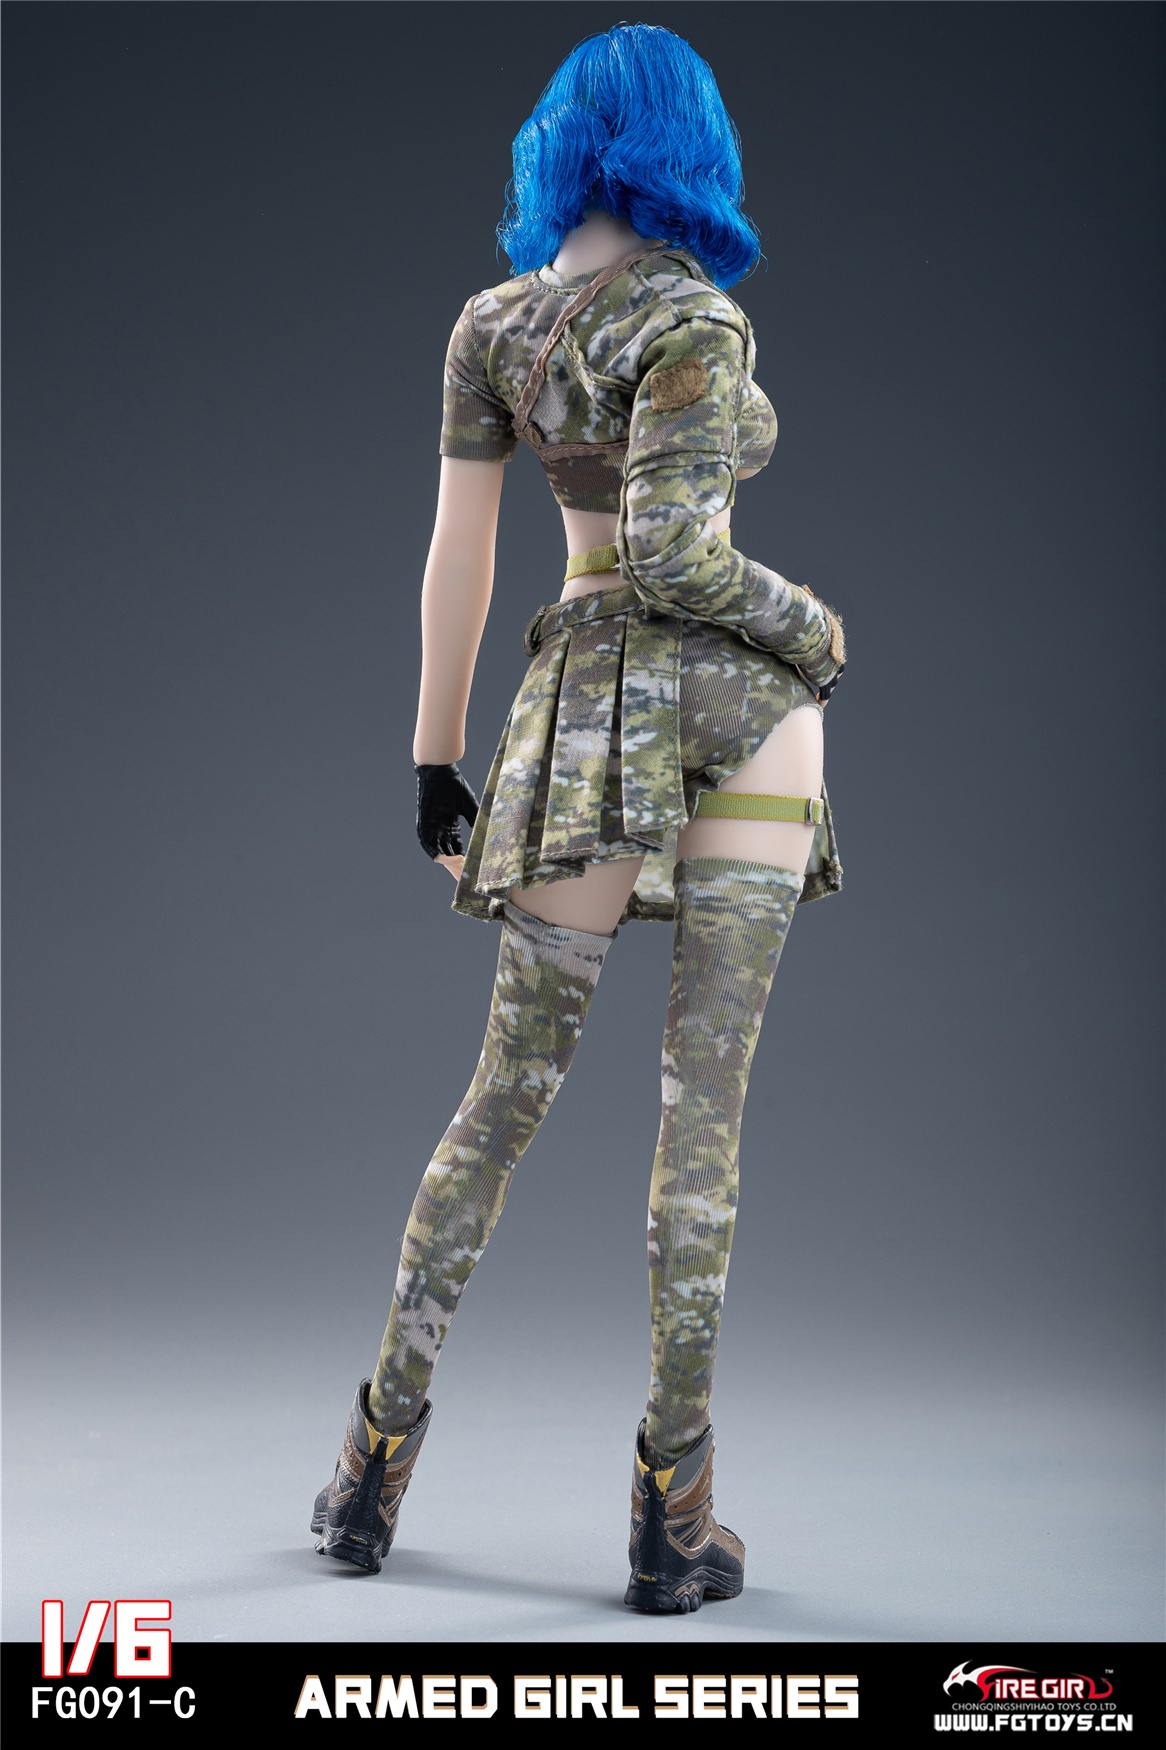 NEW PRODUCT: Fire Girl Toys - Soldier FG091 Armed Girls Series (3 styles A/B/C ) 13010